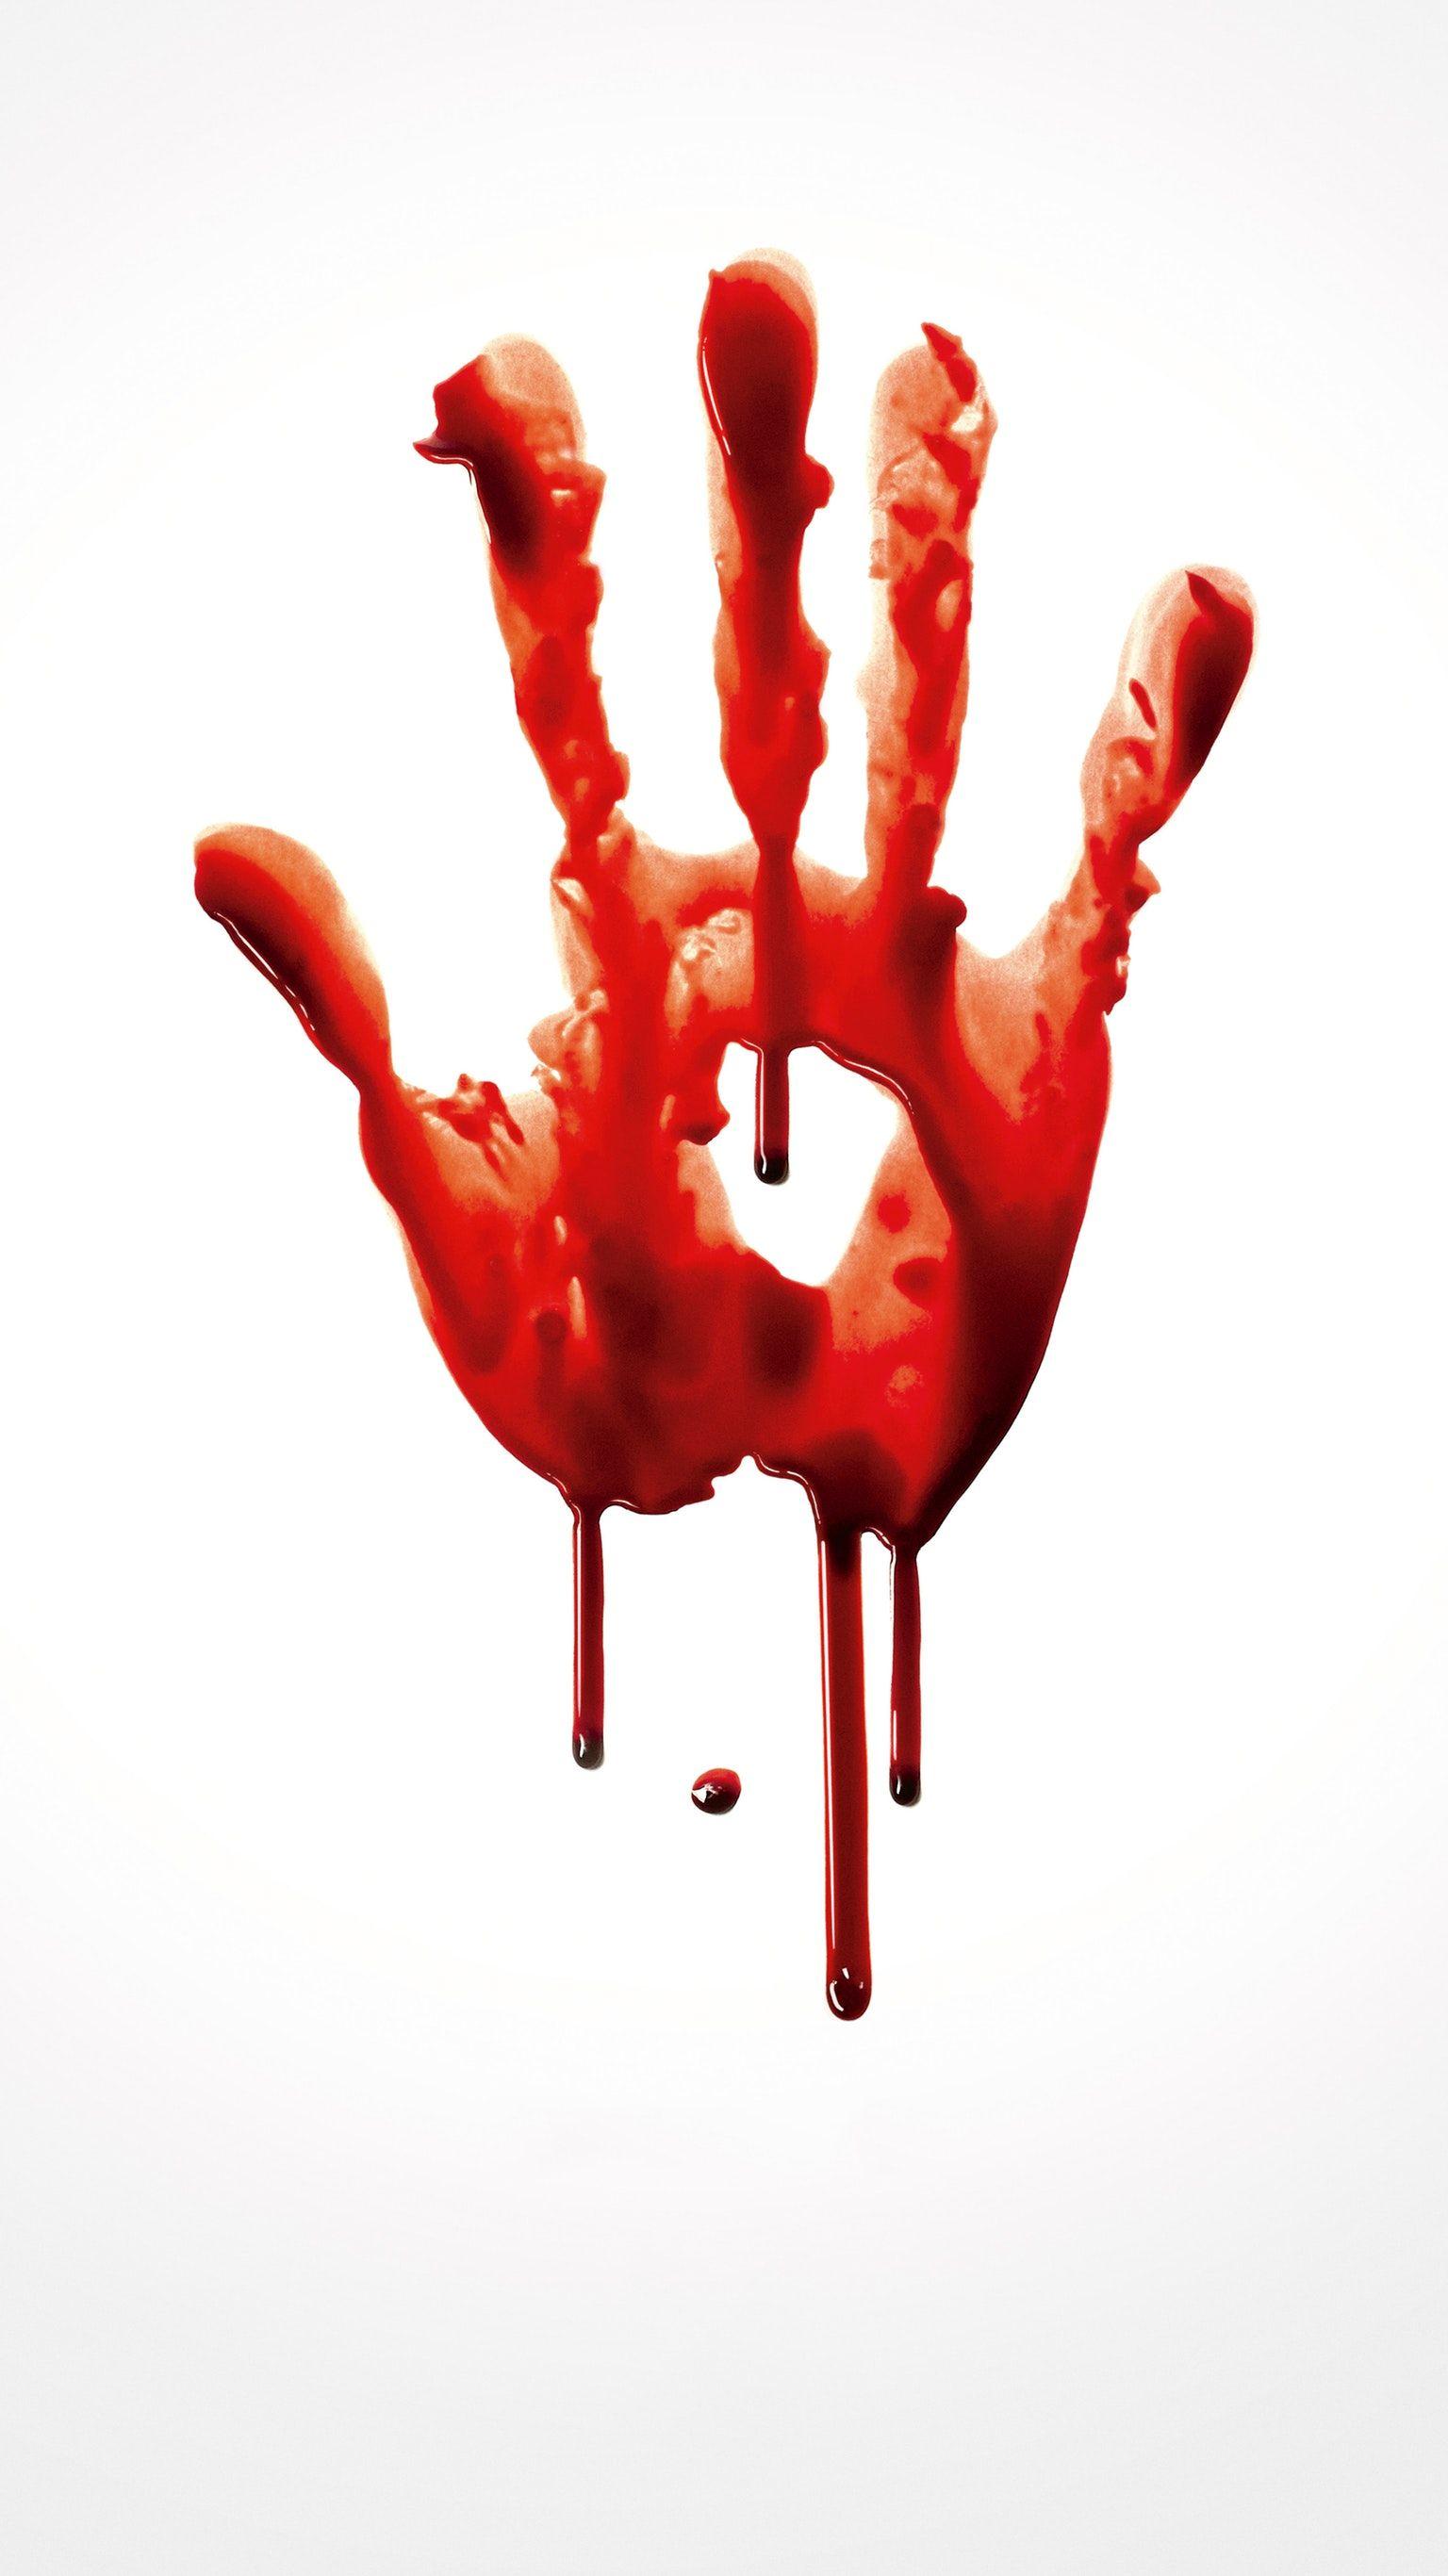 Bloody Background Images HD Pictures and Wallpaper For Free Download   Pngtree